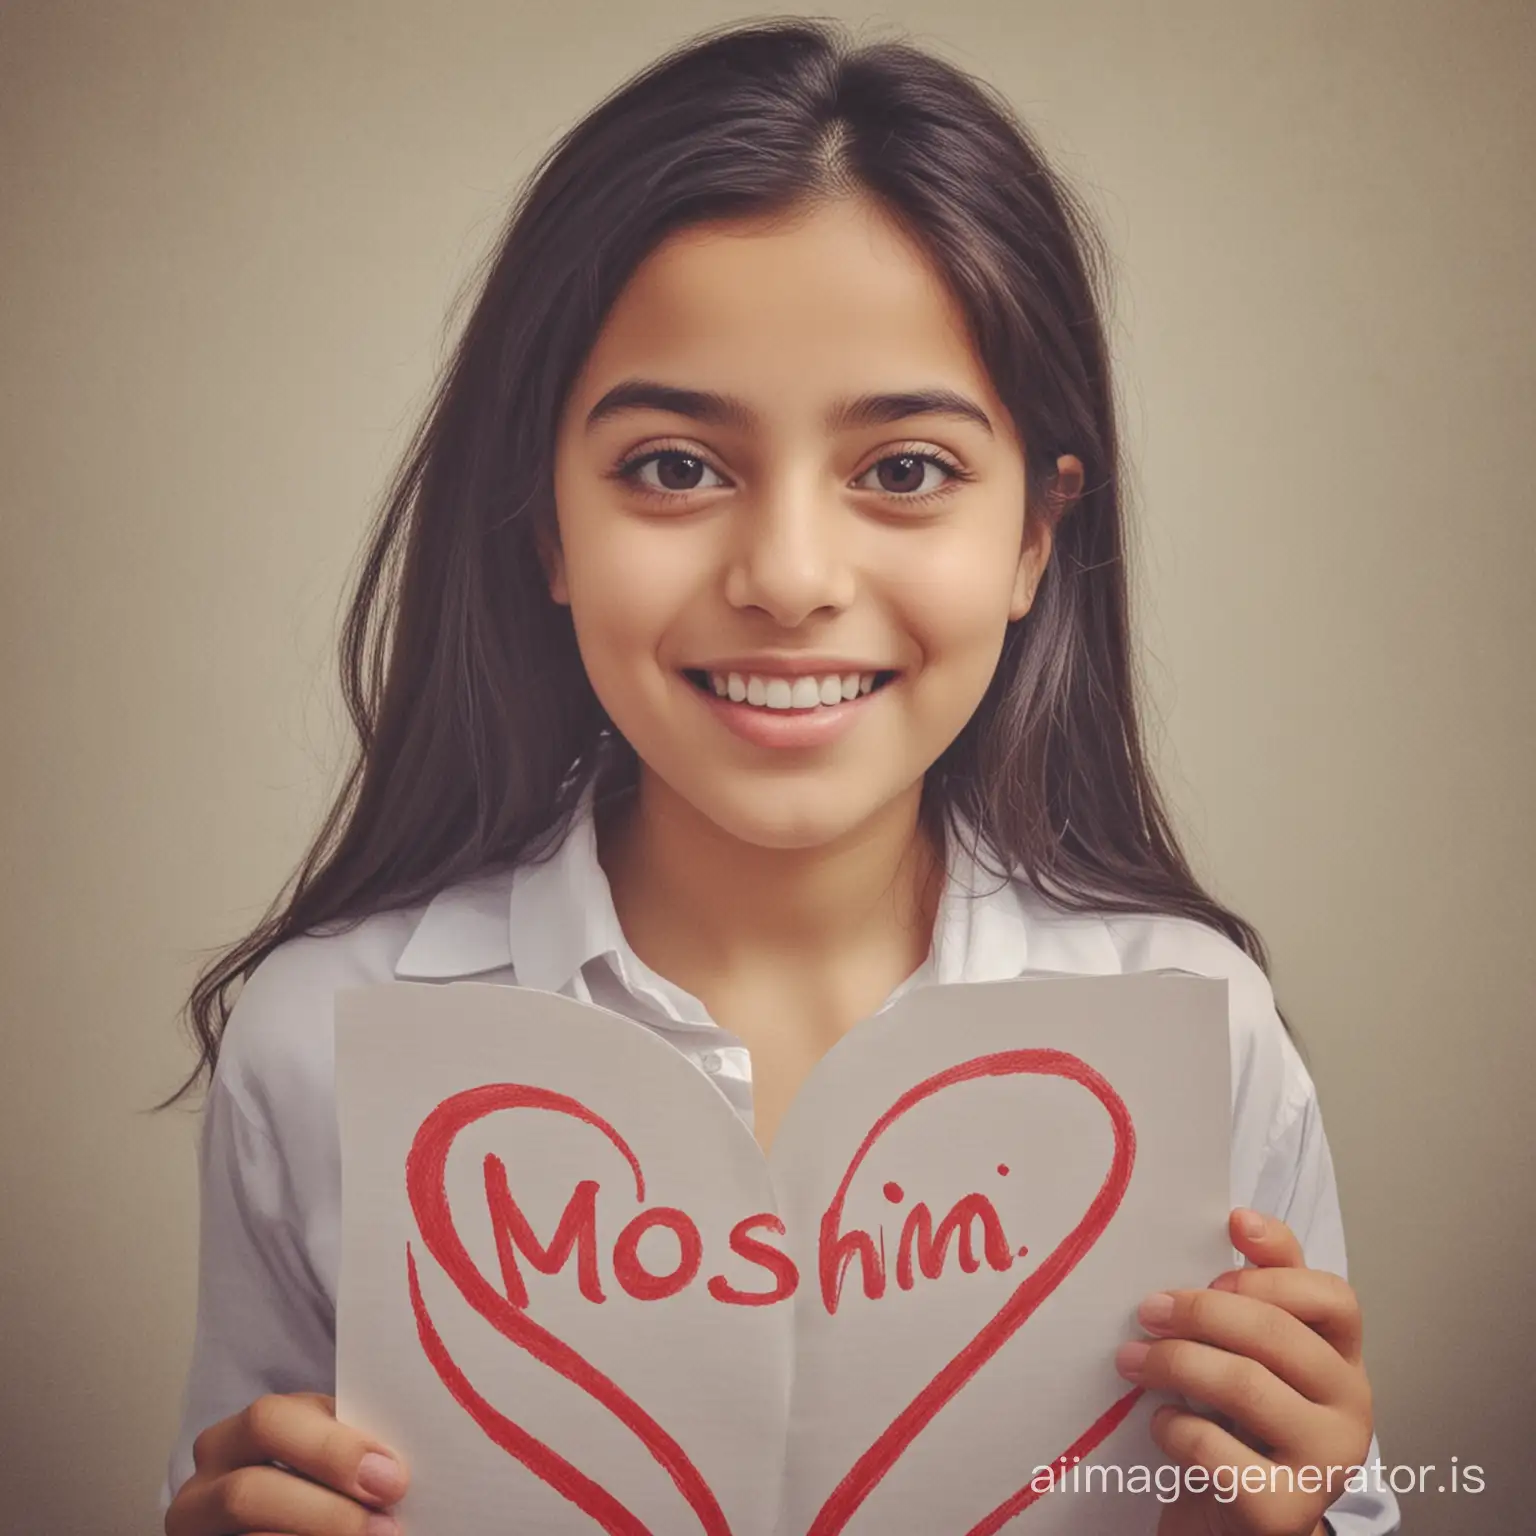 A girl, she show her heart in which writed word "Mohsin "